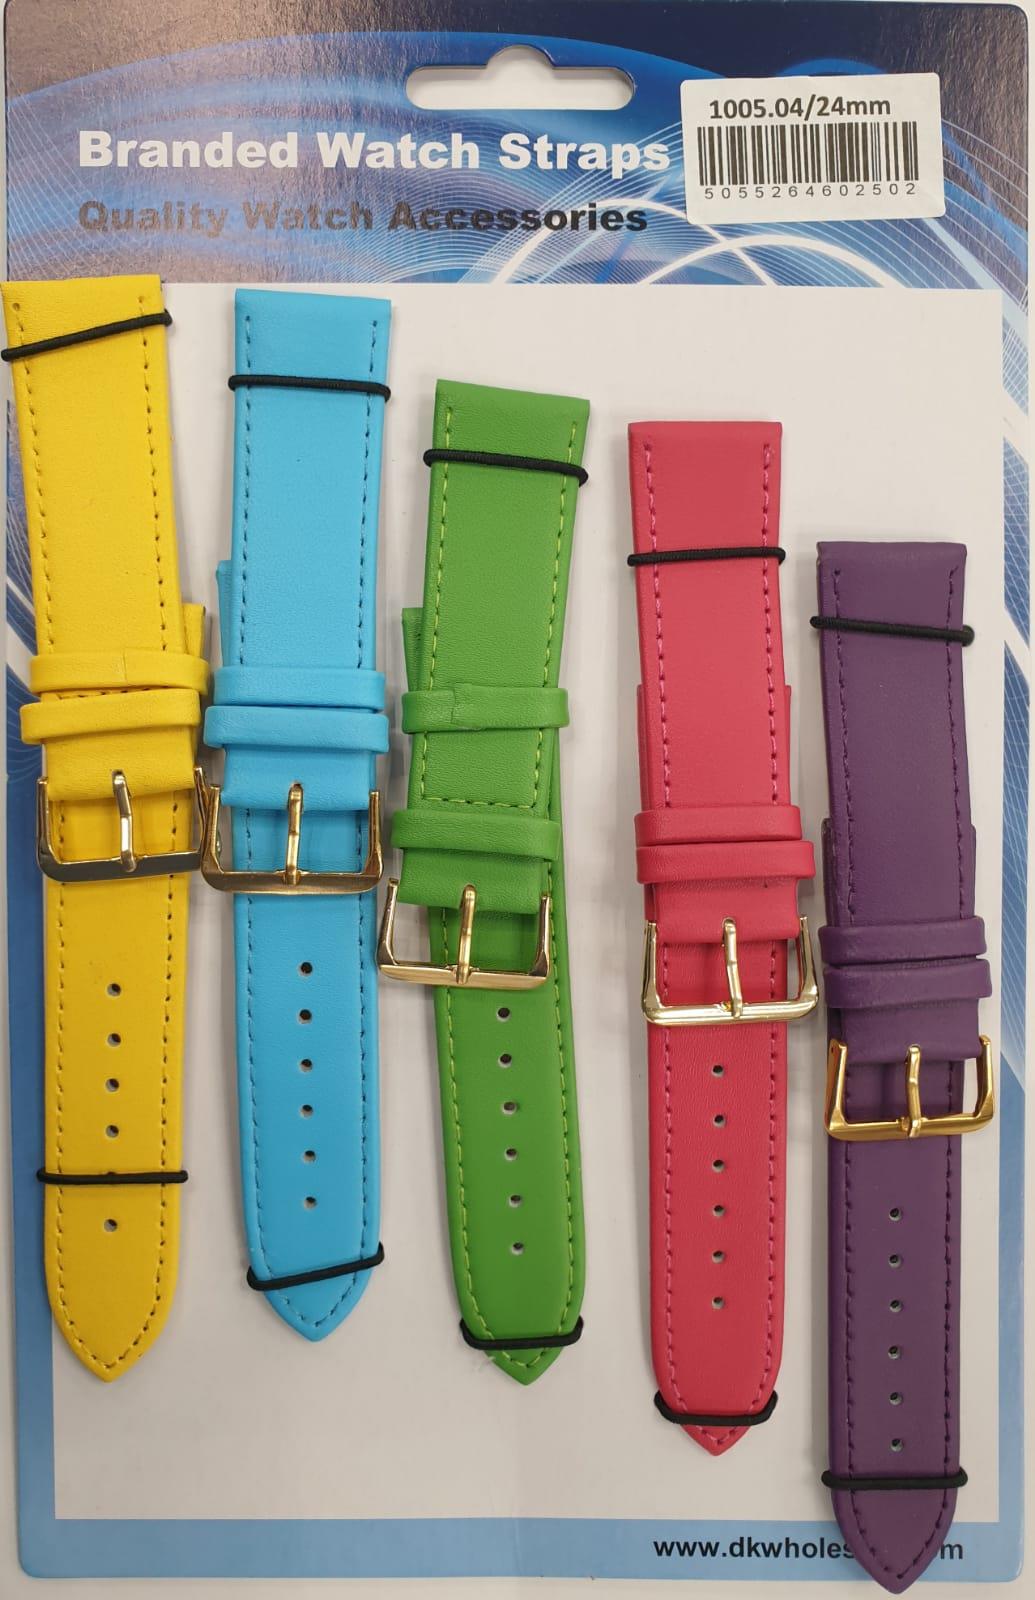 Leather Pastels Watch Straps Pk10 Available sizes From 6mm to 24mm 1005.04